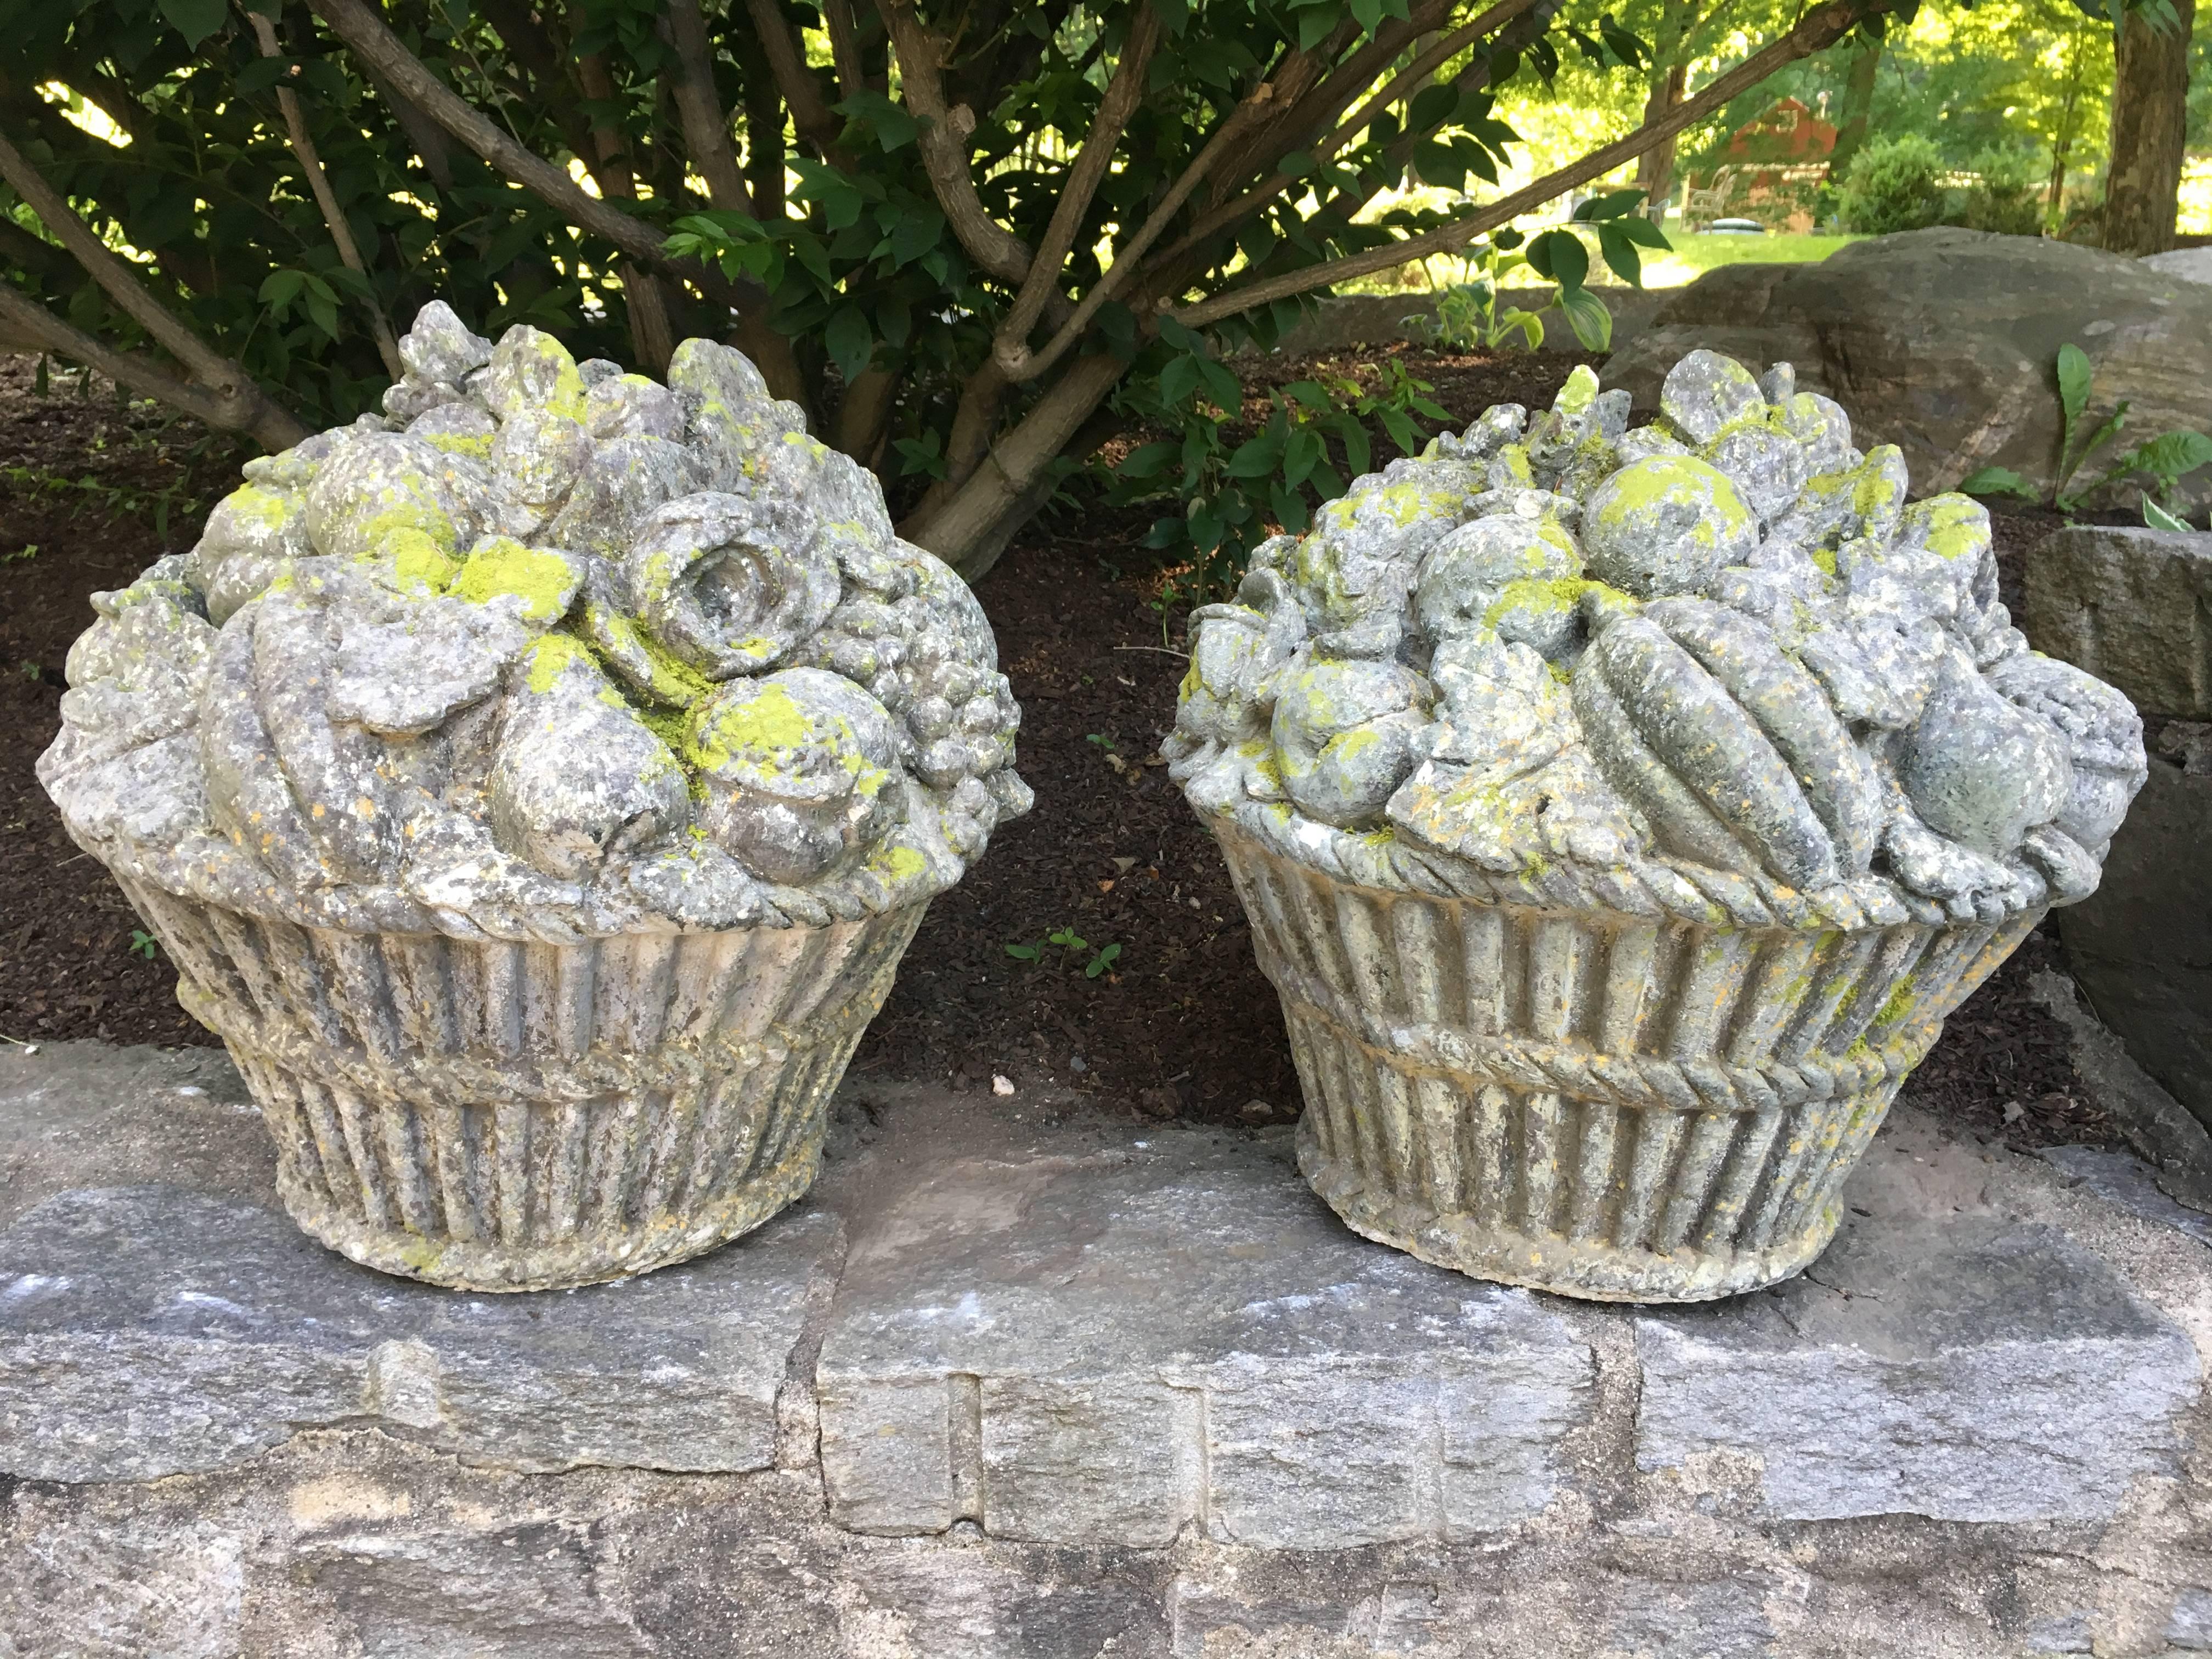 These cast stone fruit and flower baskets have very little age, but are charming and well executed nonetheless. With a plethora of grapes, bananas, apples, pears and leaves, they would make a wonderful addition atop a stone wall flanking the